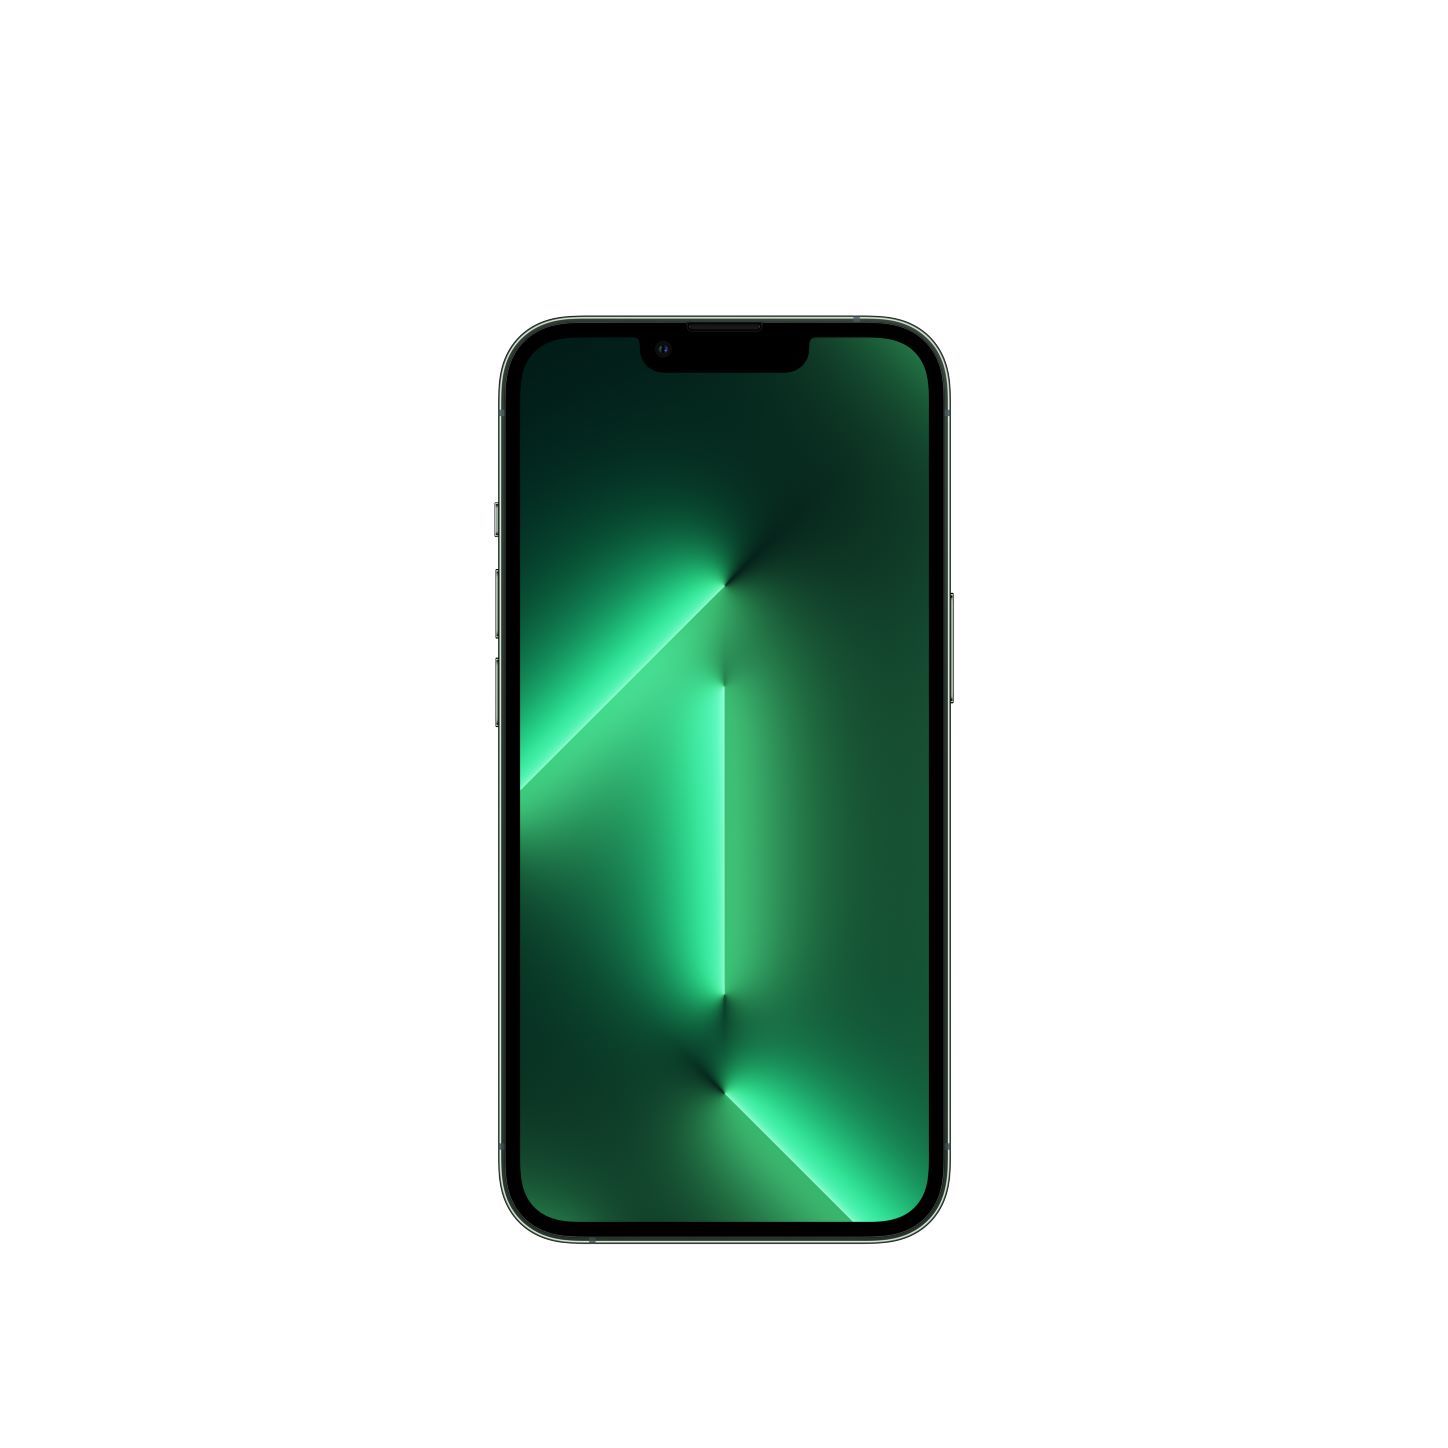 AT&T iPhone 13 Pro 128GB Alpine Green - image 2 of 8